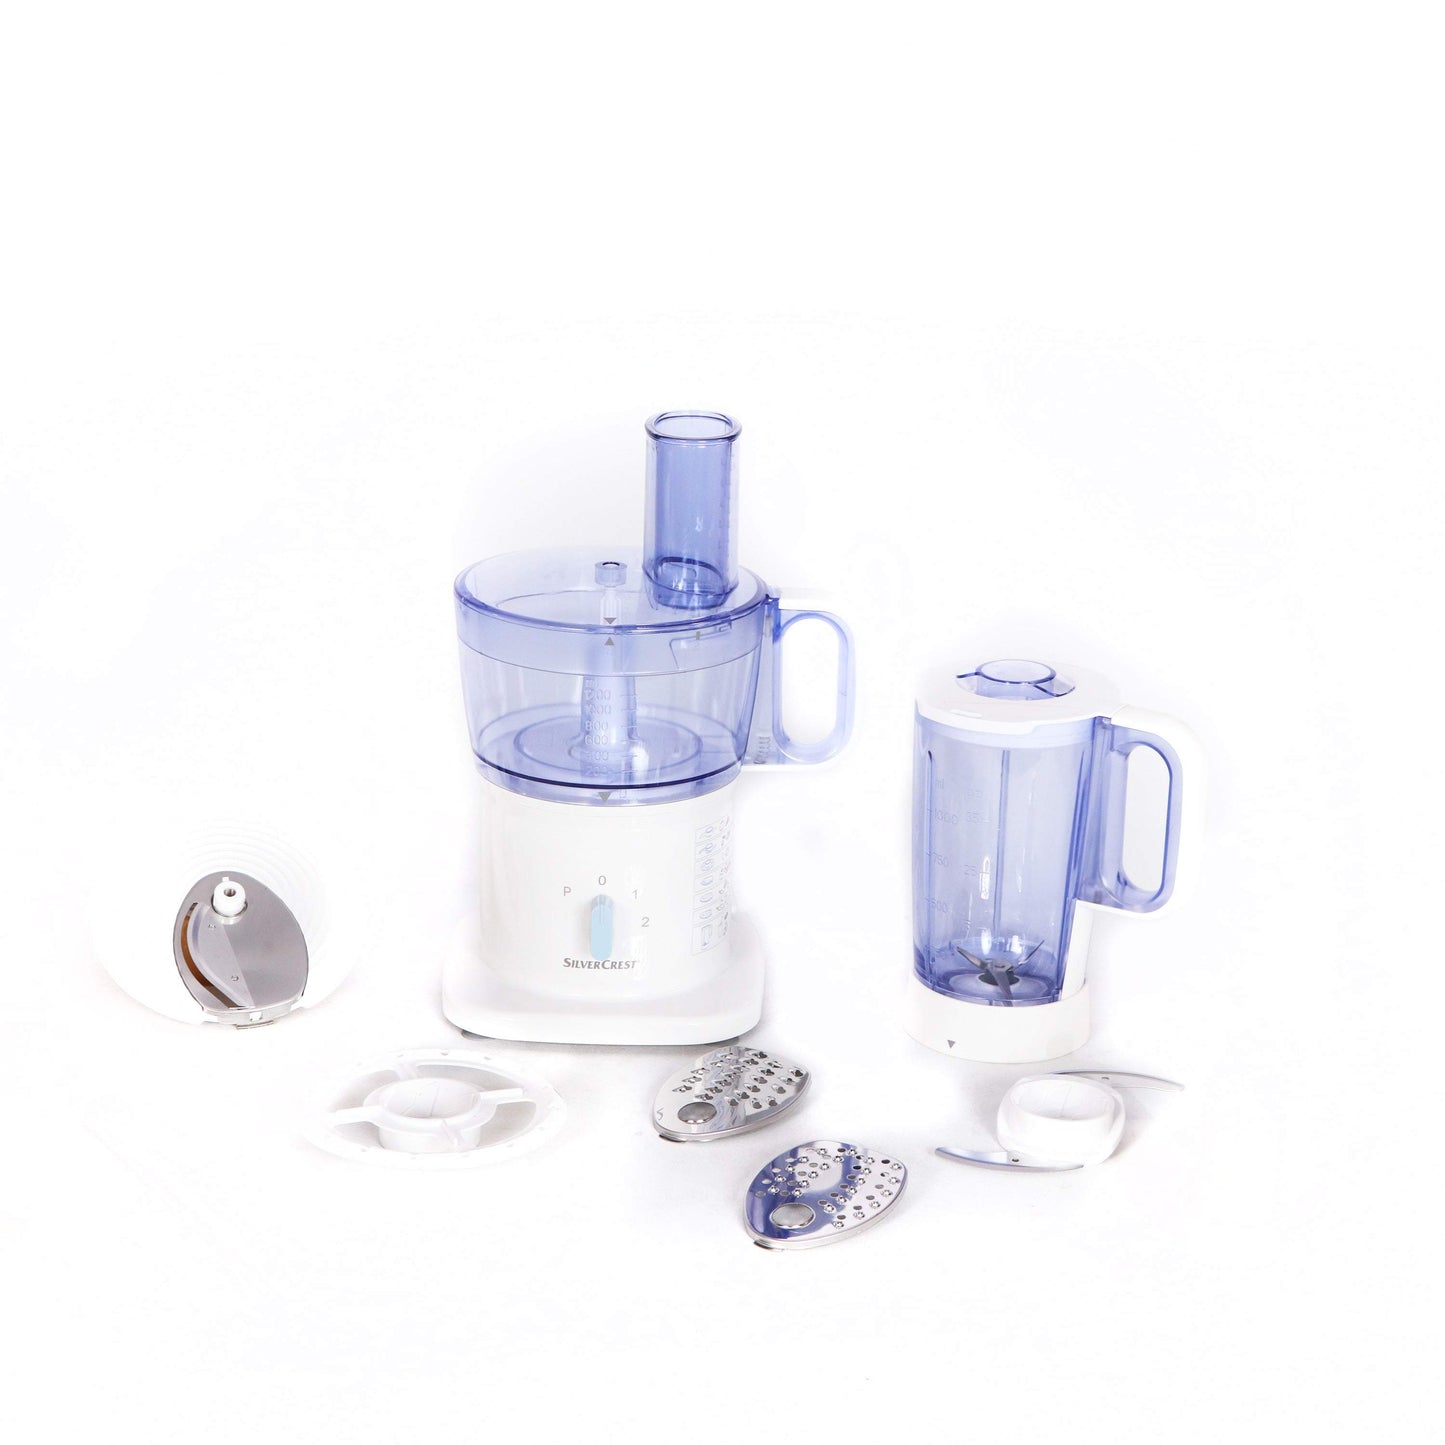 SilverCrest Food Processor, 8 In One, 500W, 8 Functions, Made In Germany-Royal Brands Co-